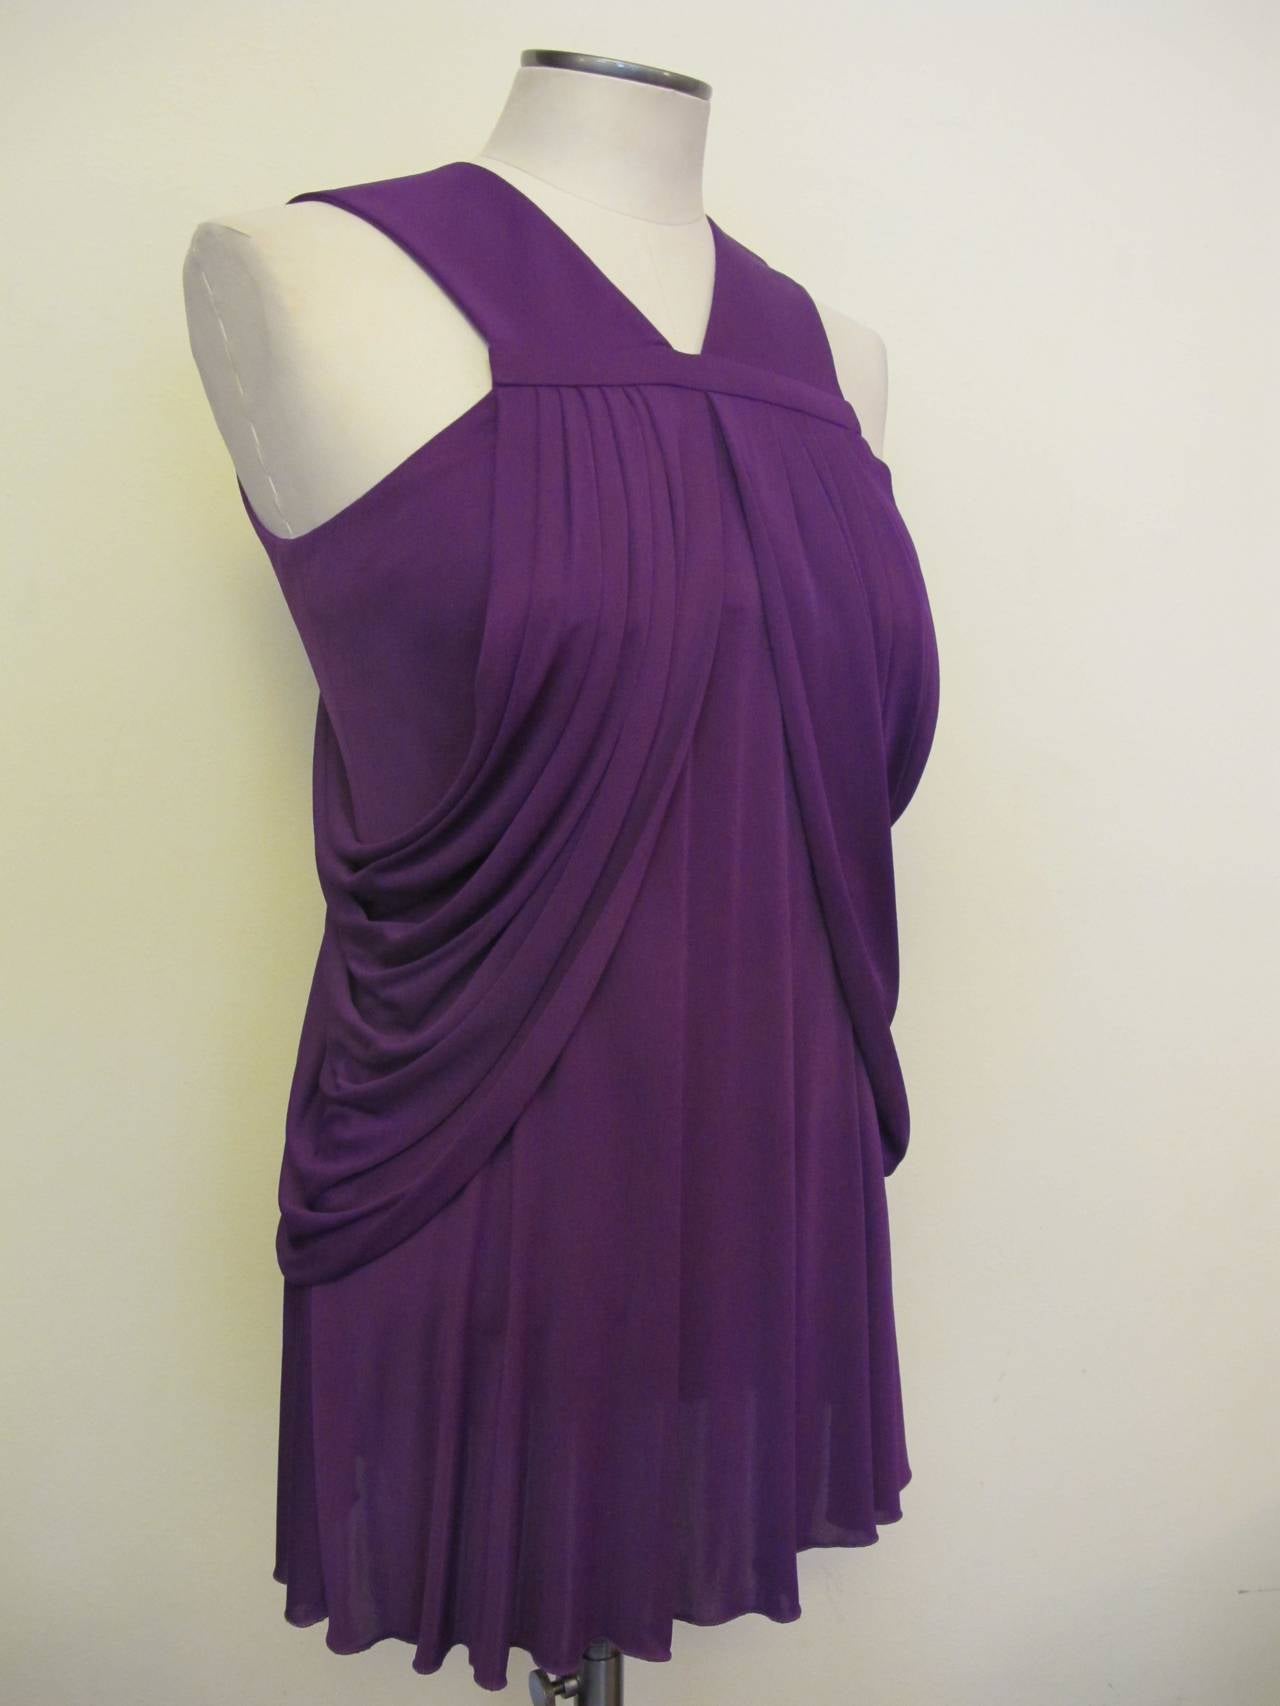 Bight purple Versace sleeveless blouse with pleating on the front shoulders, draping throughout and key hole opening at back with button closure at nape of neck. Fabric stretches. Regular price was $1,395.00. Helpers Price $465.00.
Bust stretches